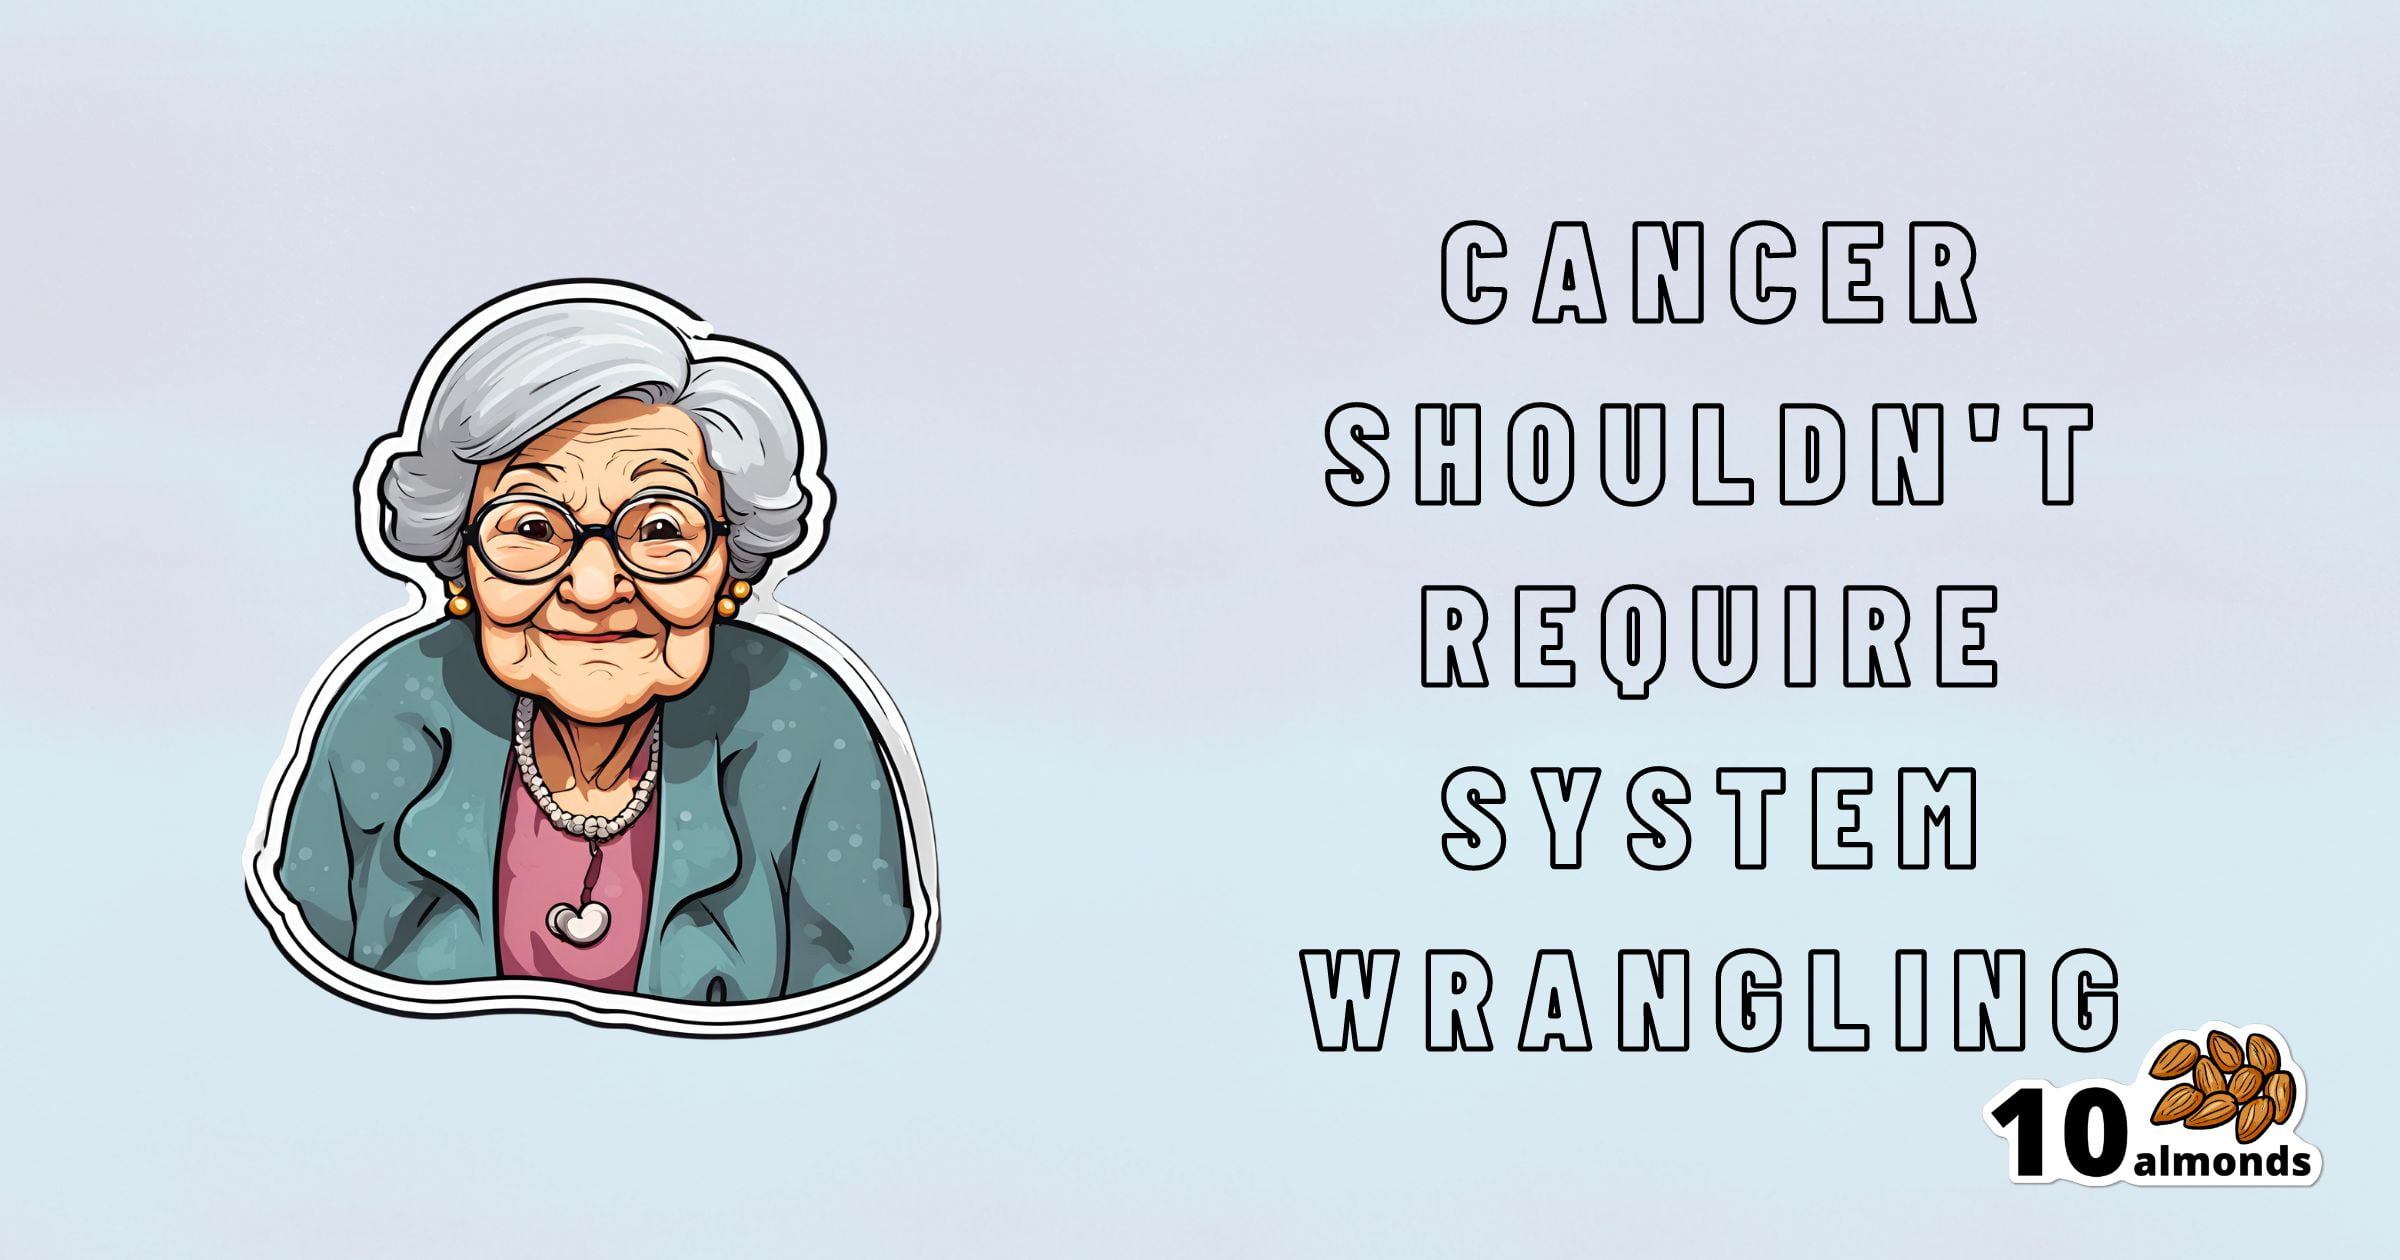 Illustration of an elderly woman with white hair and glasses, wearing a green sweater and a heart-shaped pendant. Text on the right reads, "Cancer shouldn't require wrangling with the health system.” A small logo at the bottom right has the number "10" next to an image of almonds.